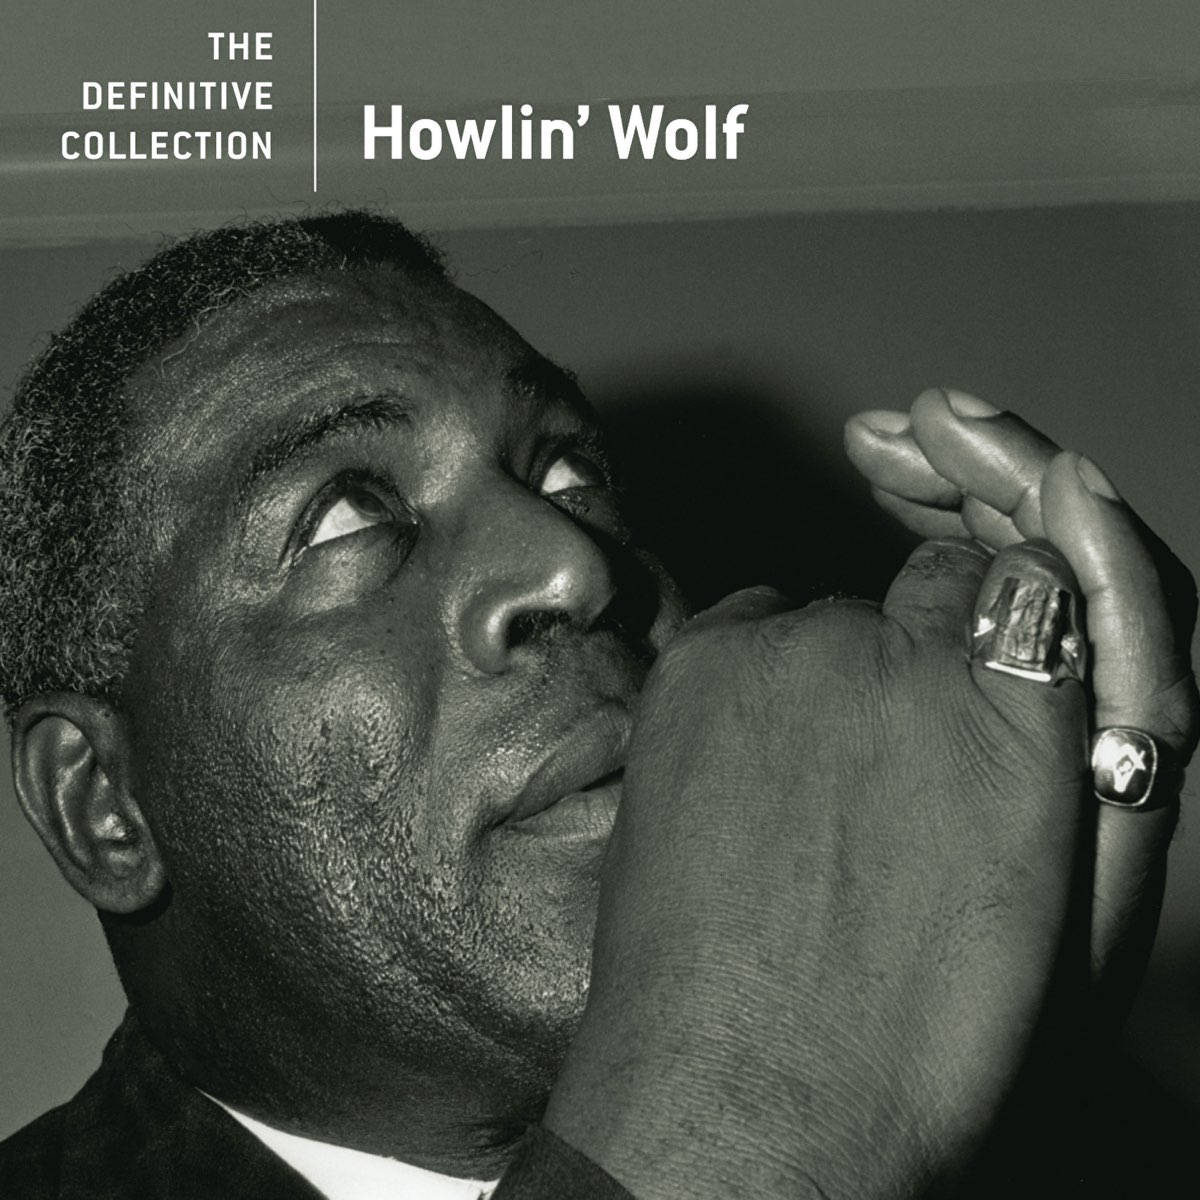 Howlin Wolf The Definitive Collection Album Cover Wallpaper